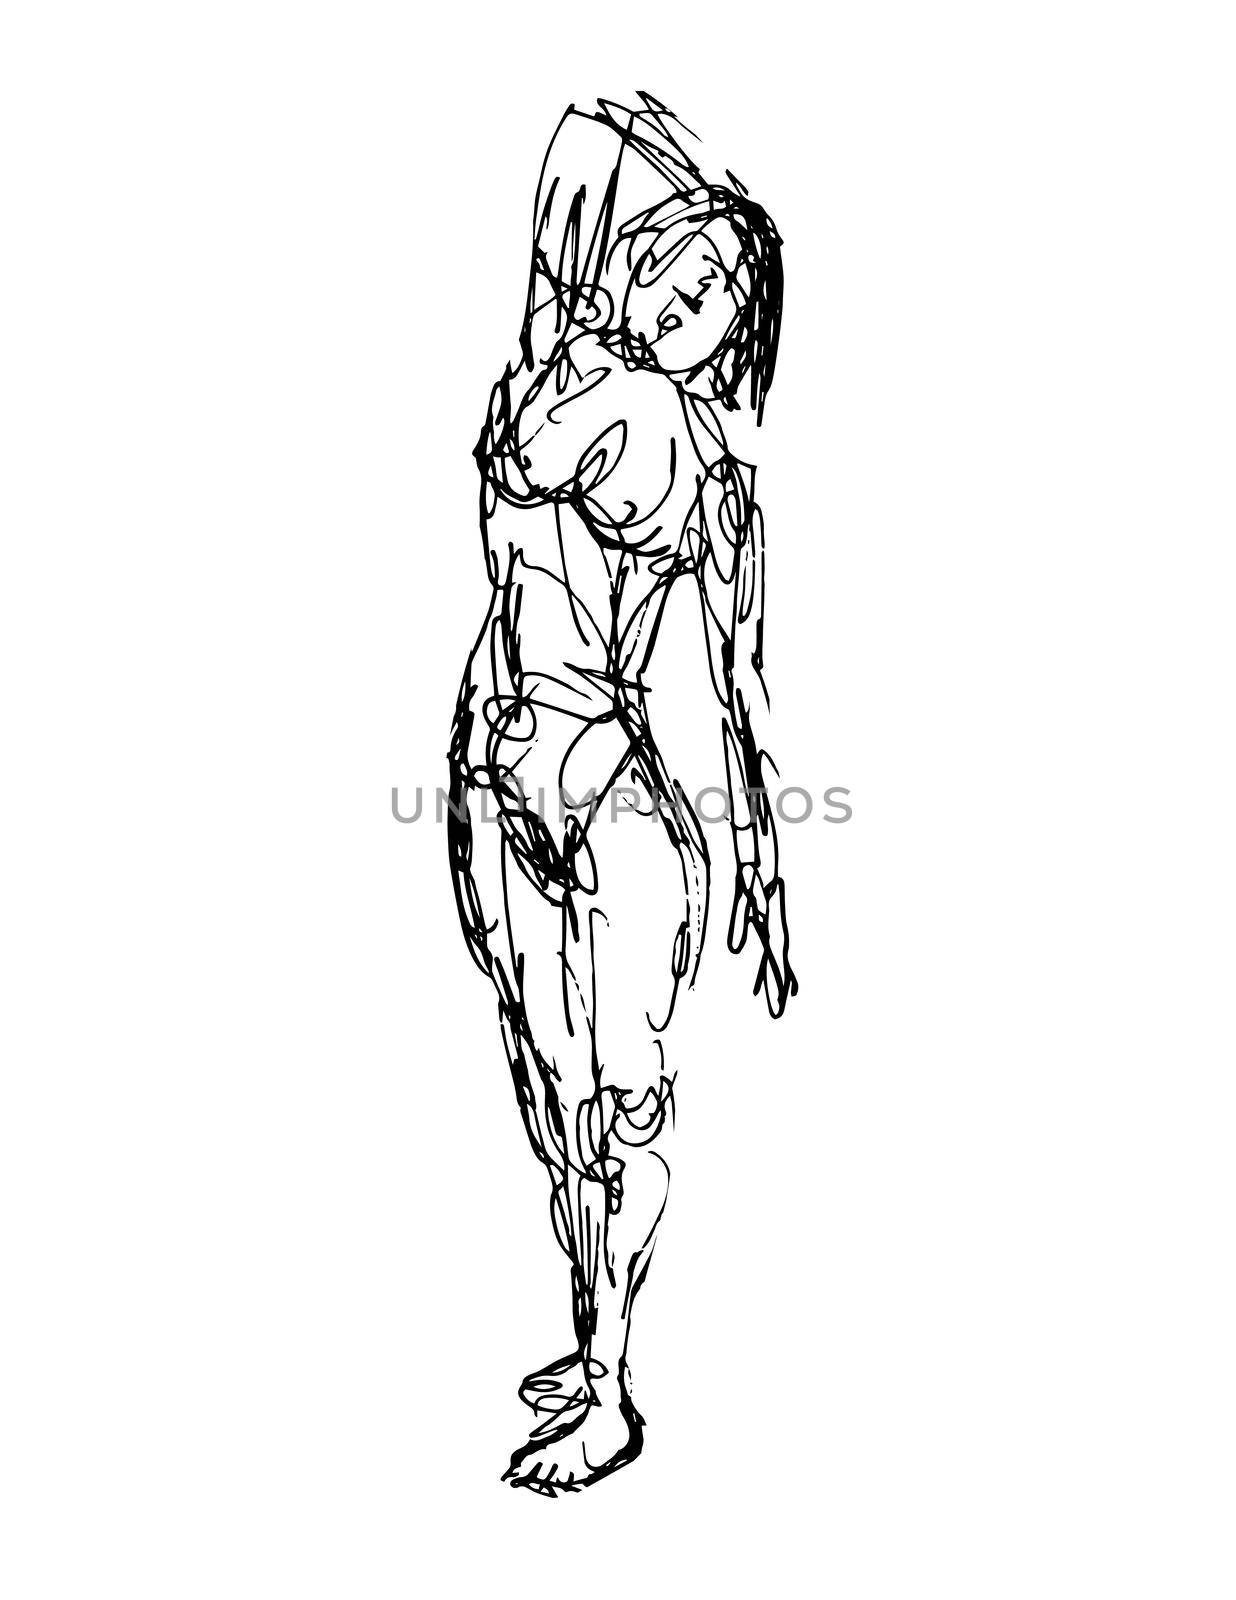 Doodle art illustration of a nude female human figure posing standing done in continuous line drawing style in black and white on isolated background.